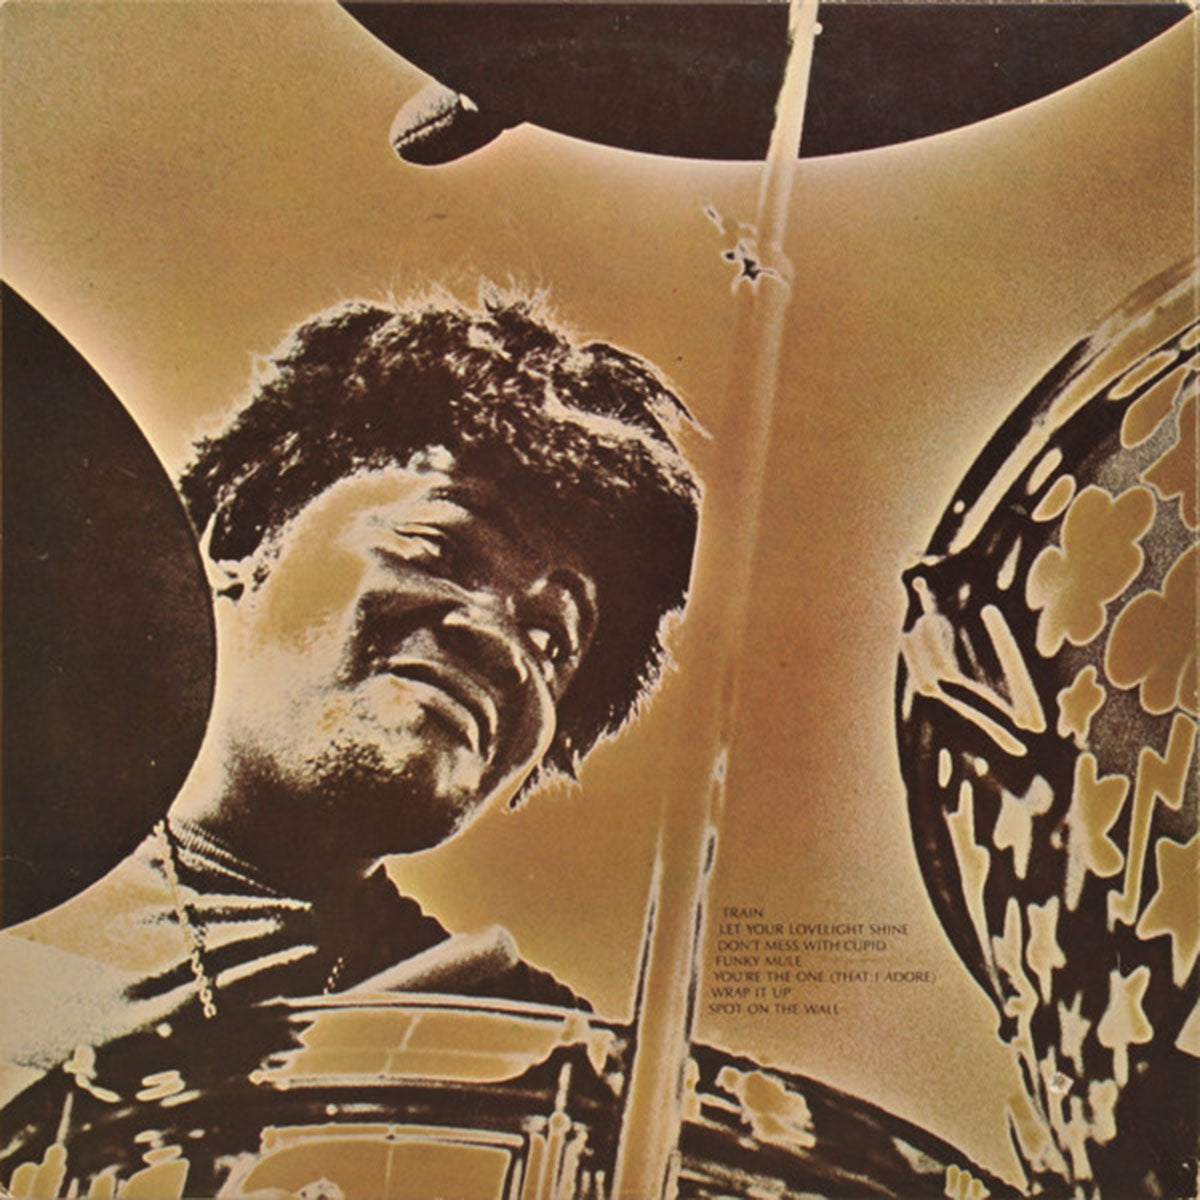 Buddy Miles Express – Expressway To Your Skull - US Pressing